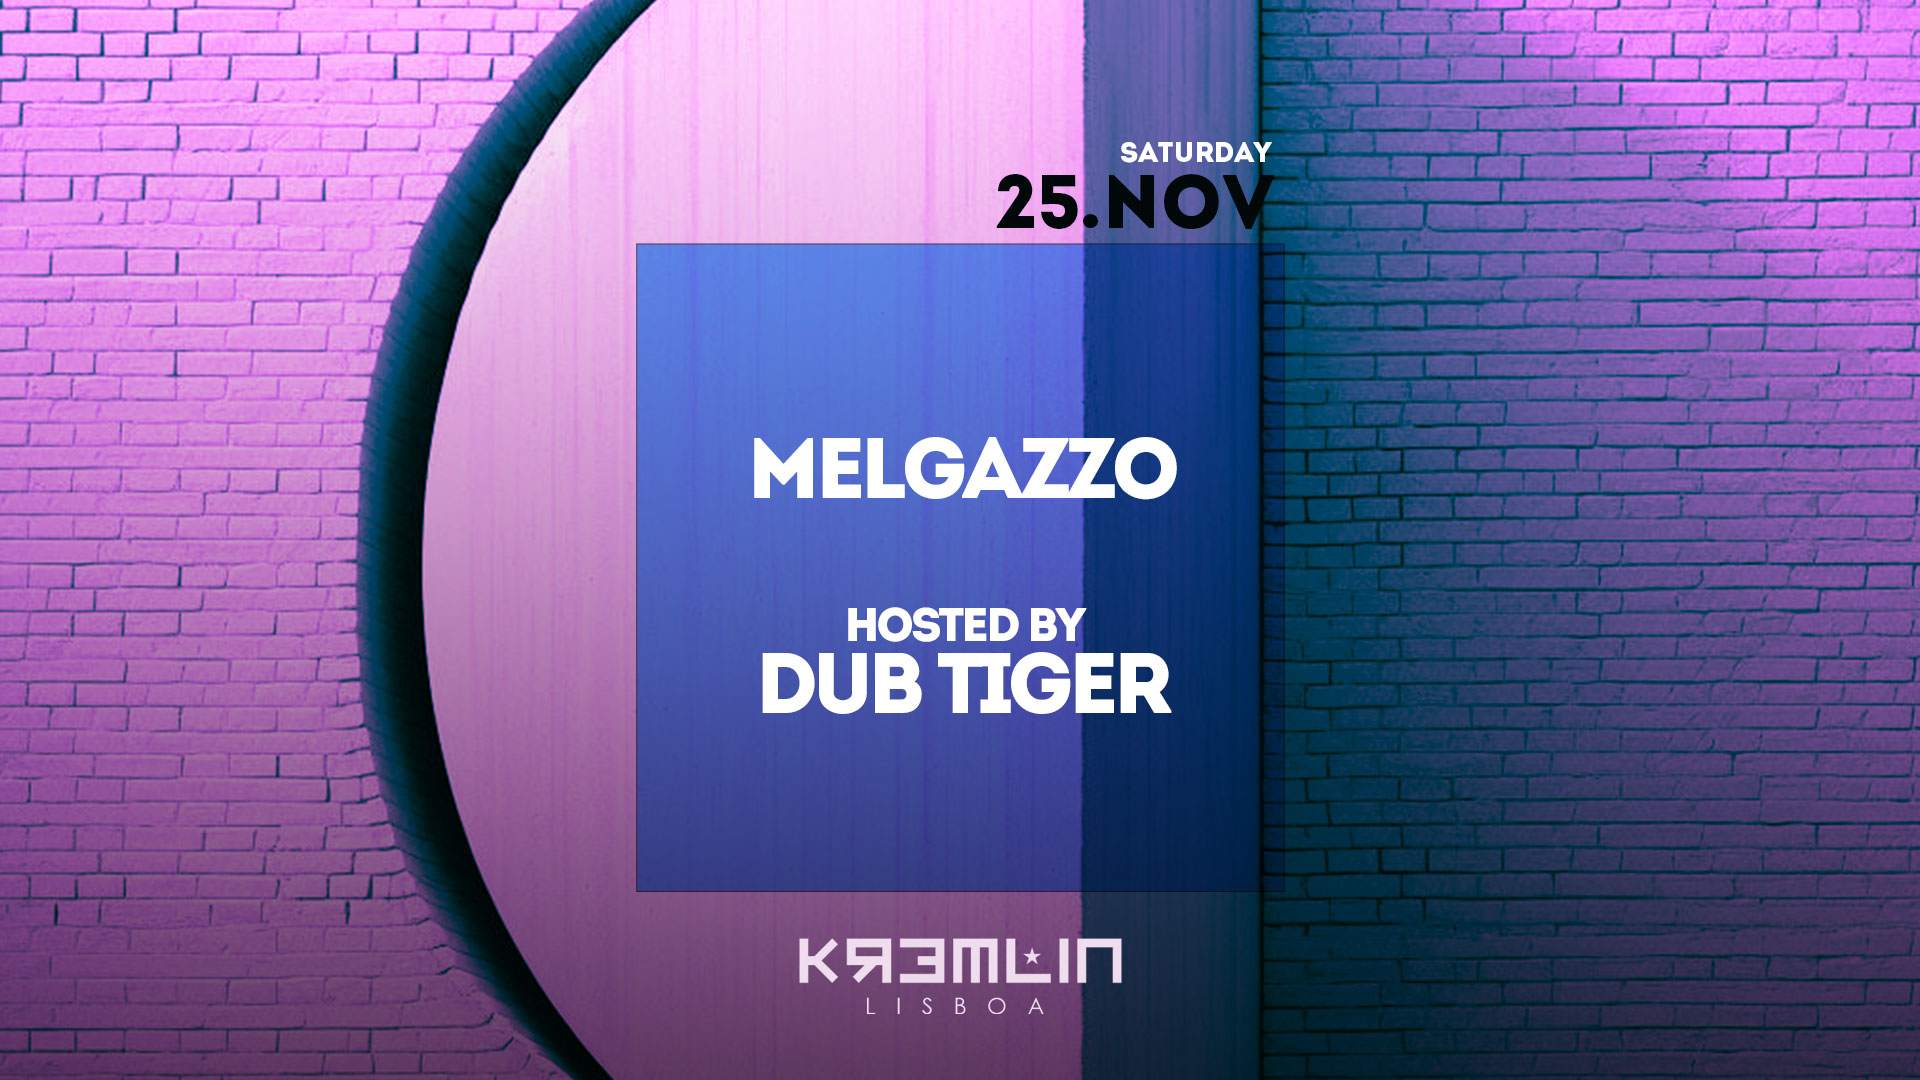 Melgazzo - Hosted by Dub Tiger - フライヤー表